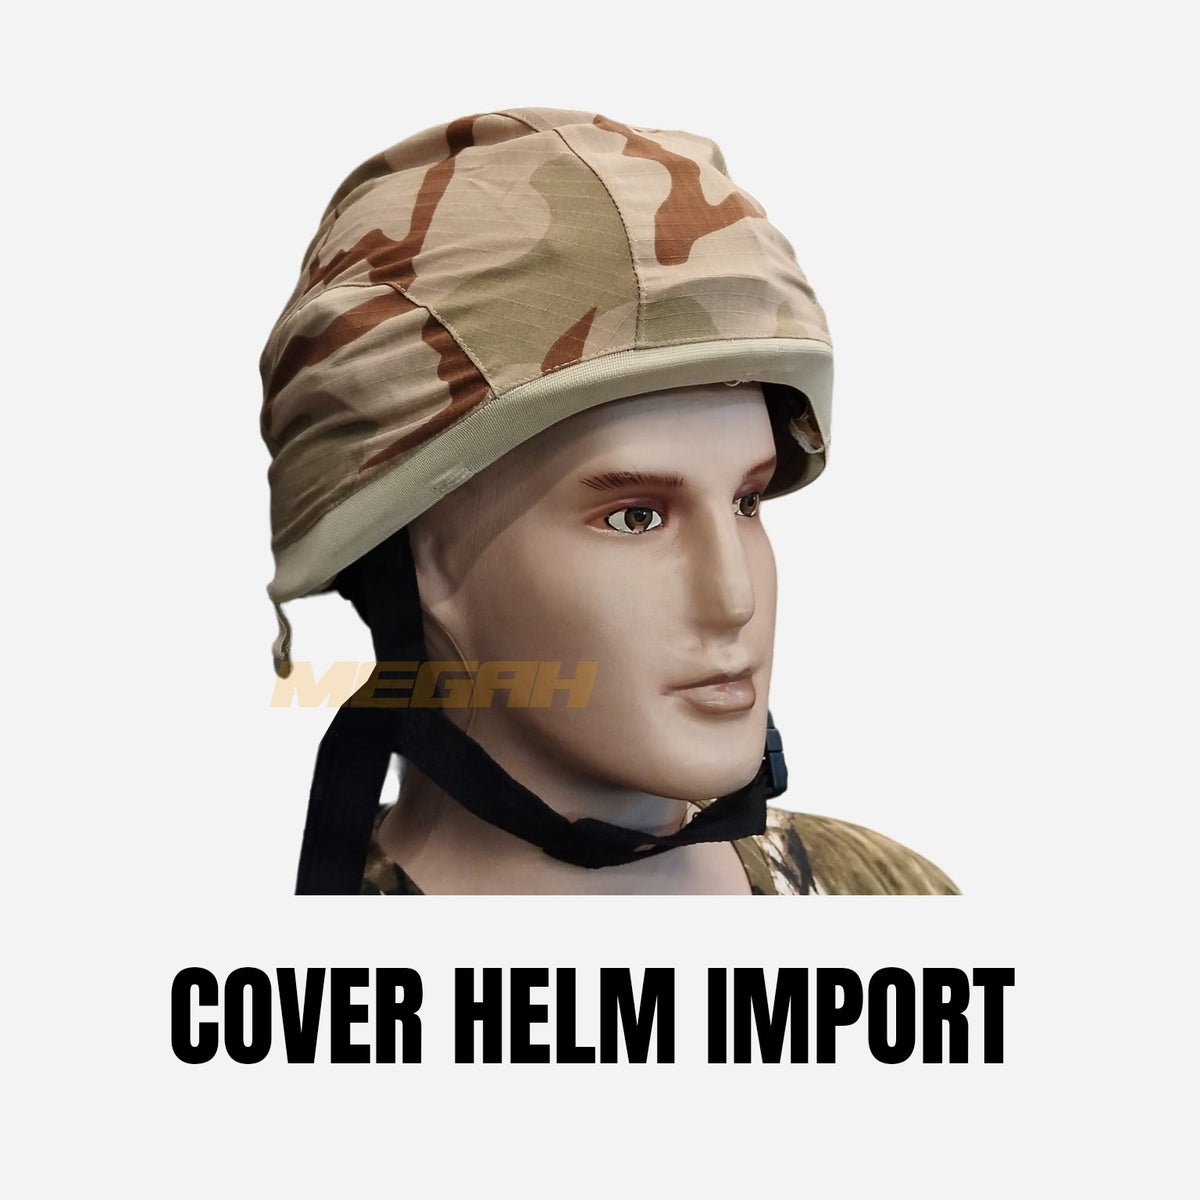 COVER HELM IMPORT